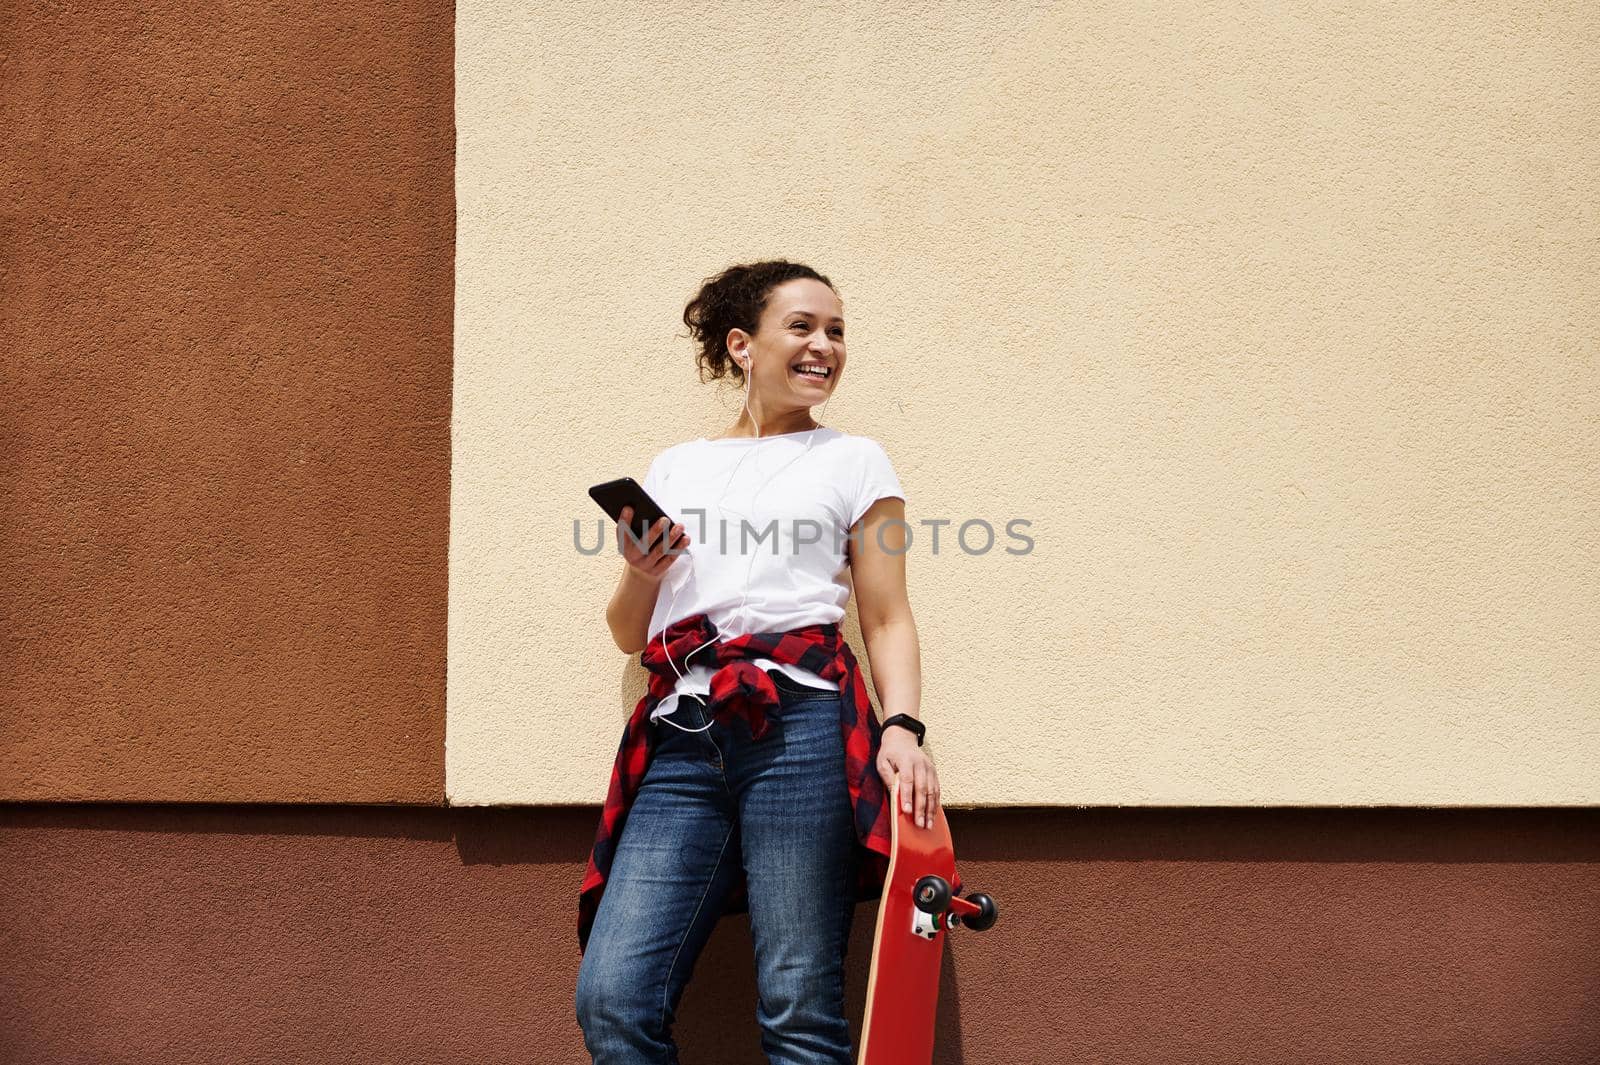 Female skateboarder with wooden red skateboard holding smartphone, enjoying listening to music posing outdoors near wall by artgf